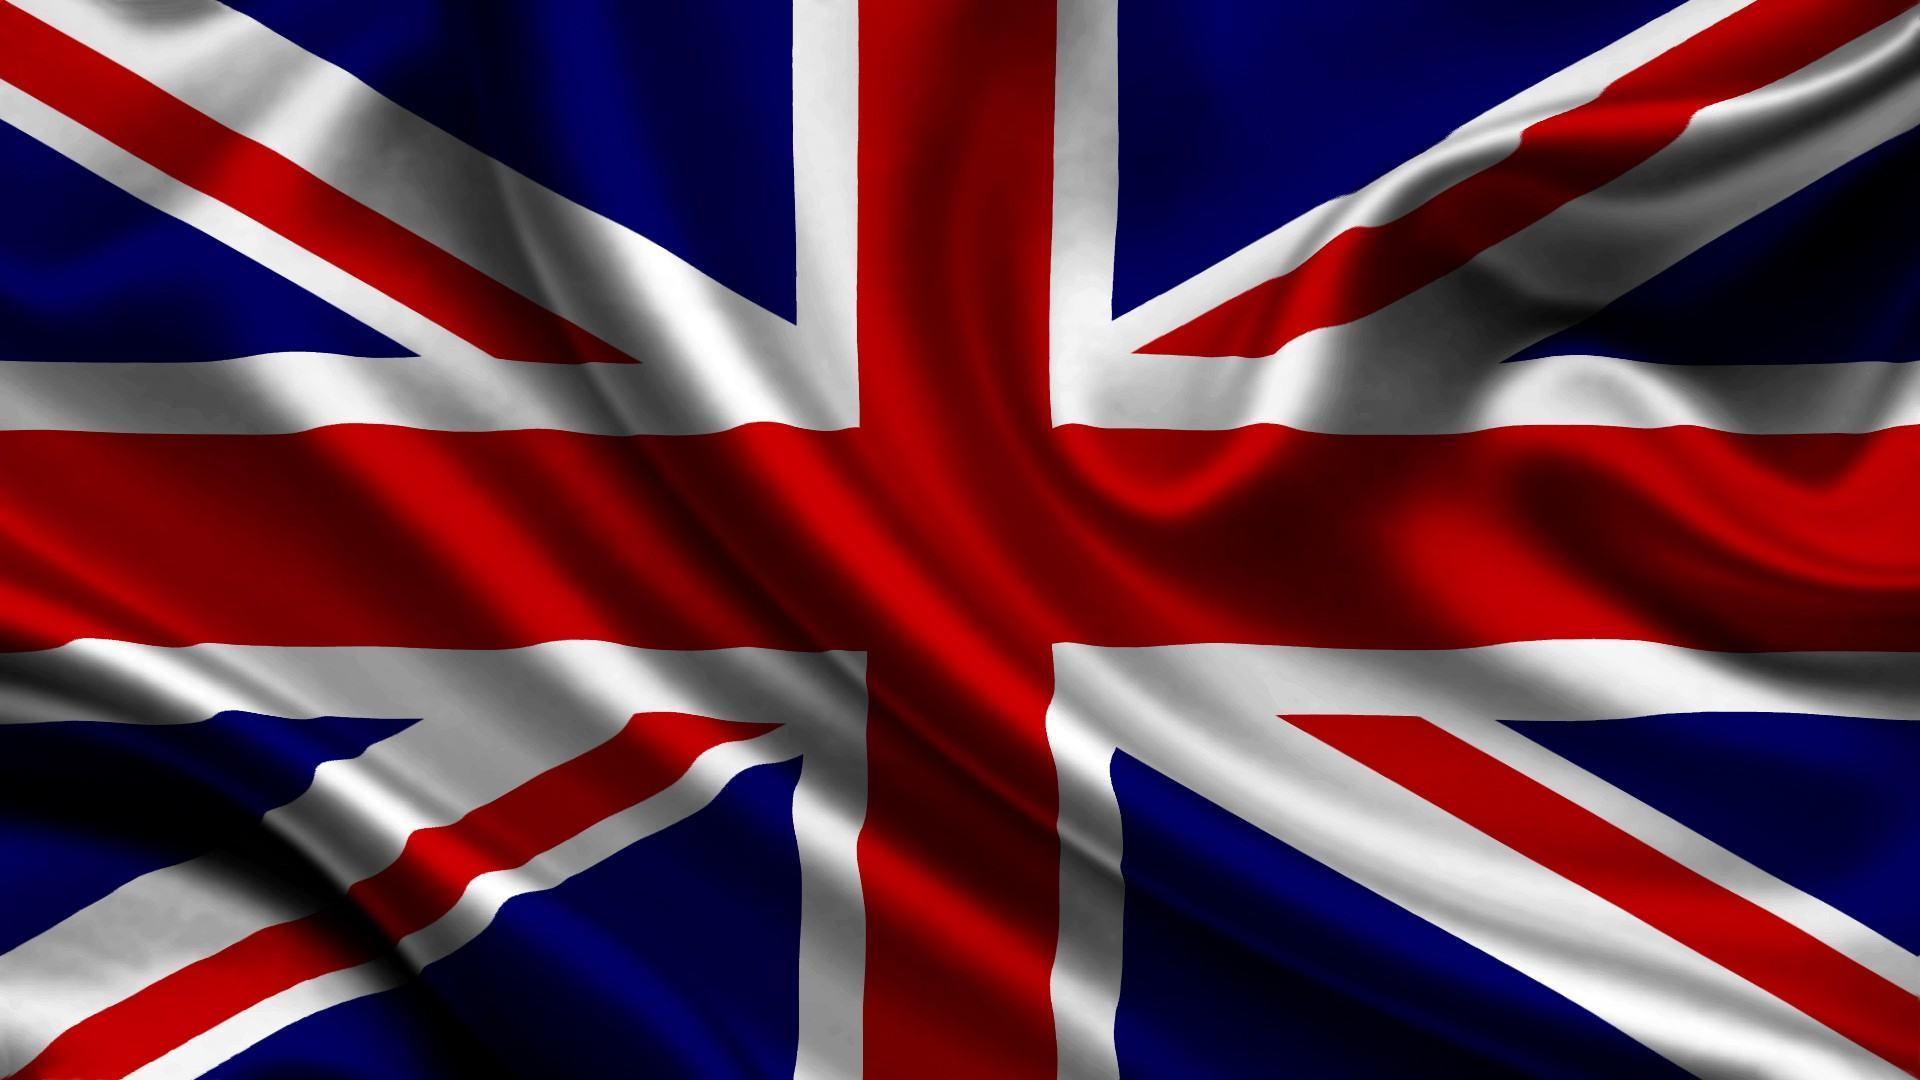 England Flag Live Wallpaper For Android Apk Download